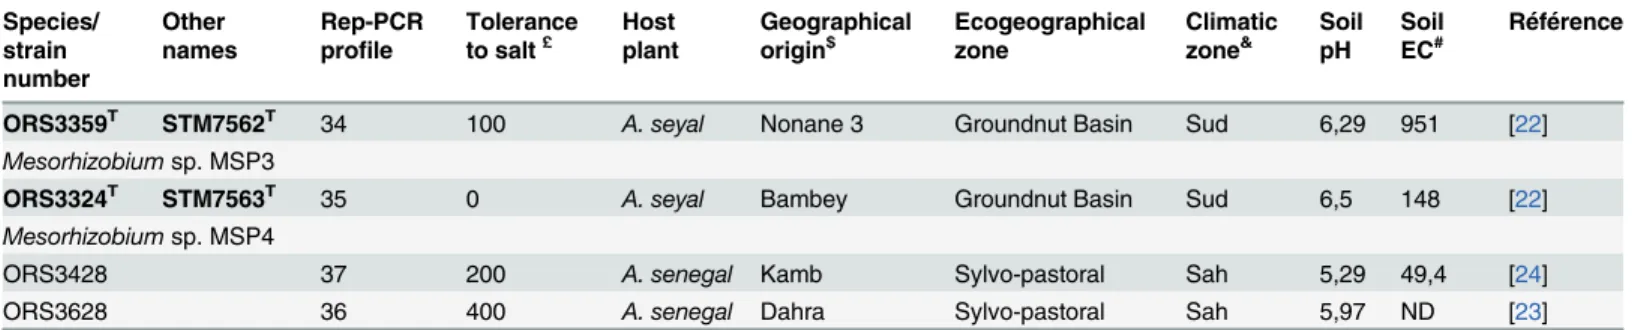 Table 1. (Continued) Species/ strain number Other names Rep-PCRproﬁle Toleranceto salt£ Host plant Geographicalorigin$ Ecogeographicalzone Climaticzone&amp; SoilpH SoilEC# Référence